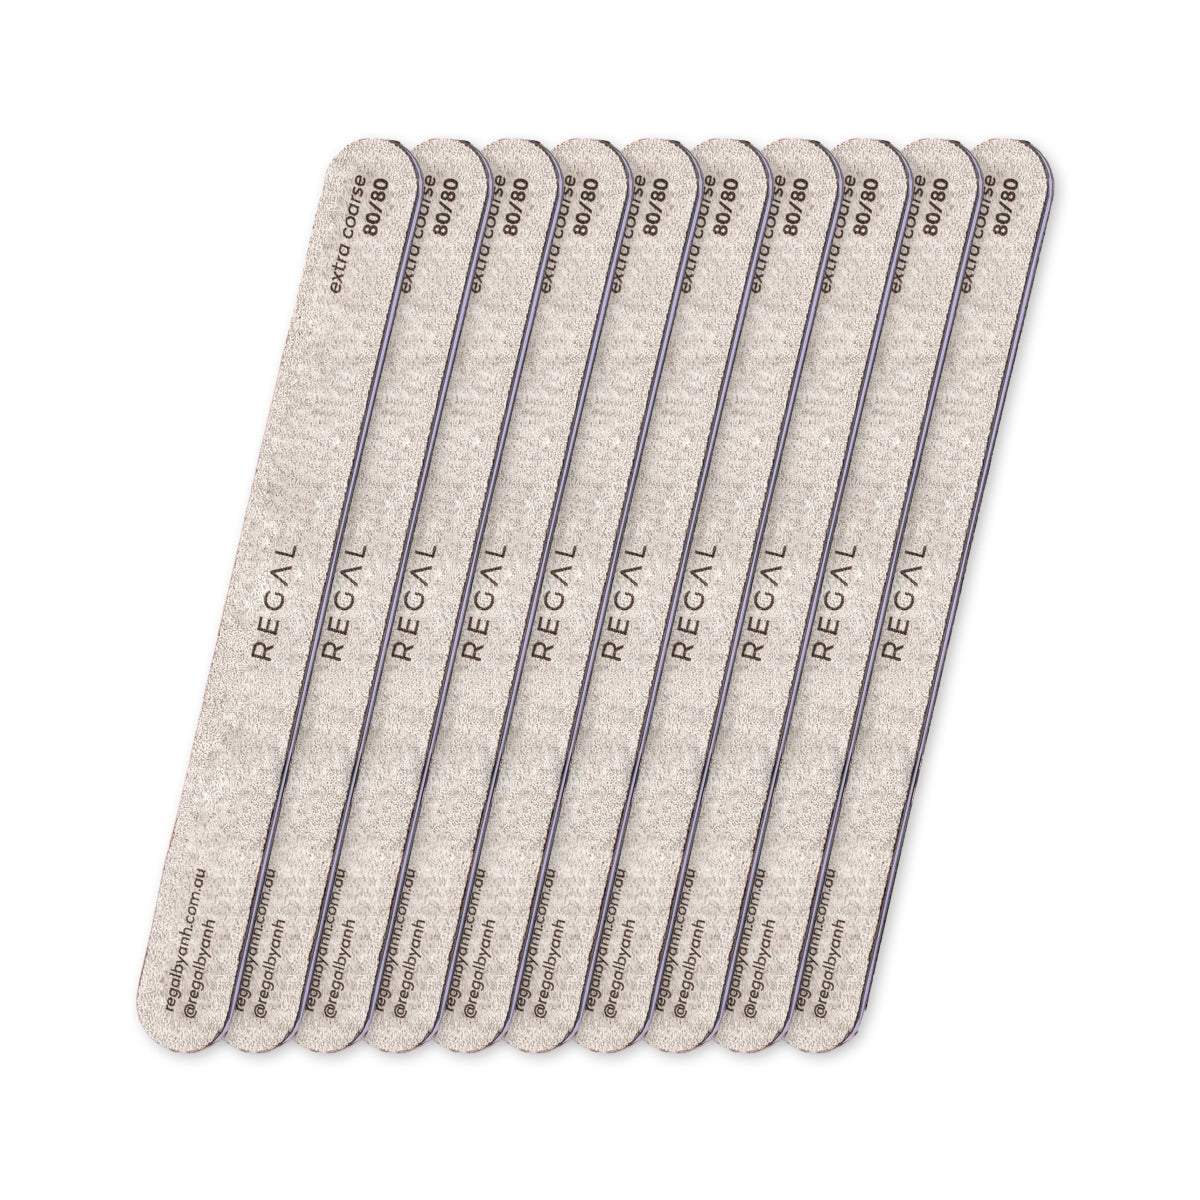 Regal by Anh Standard Extra Coarse 80/80 Nail File (10 Pack)